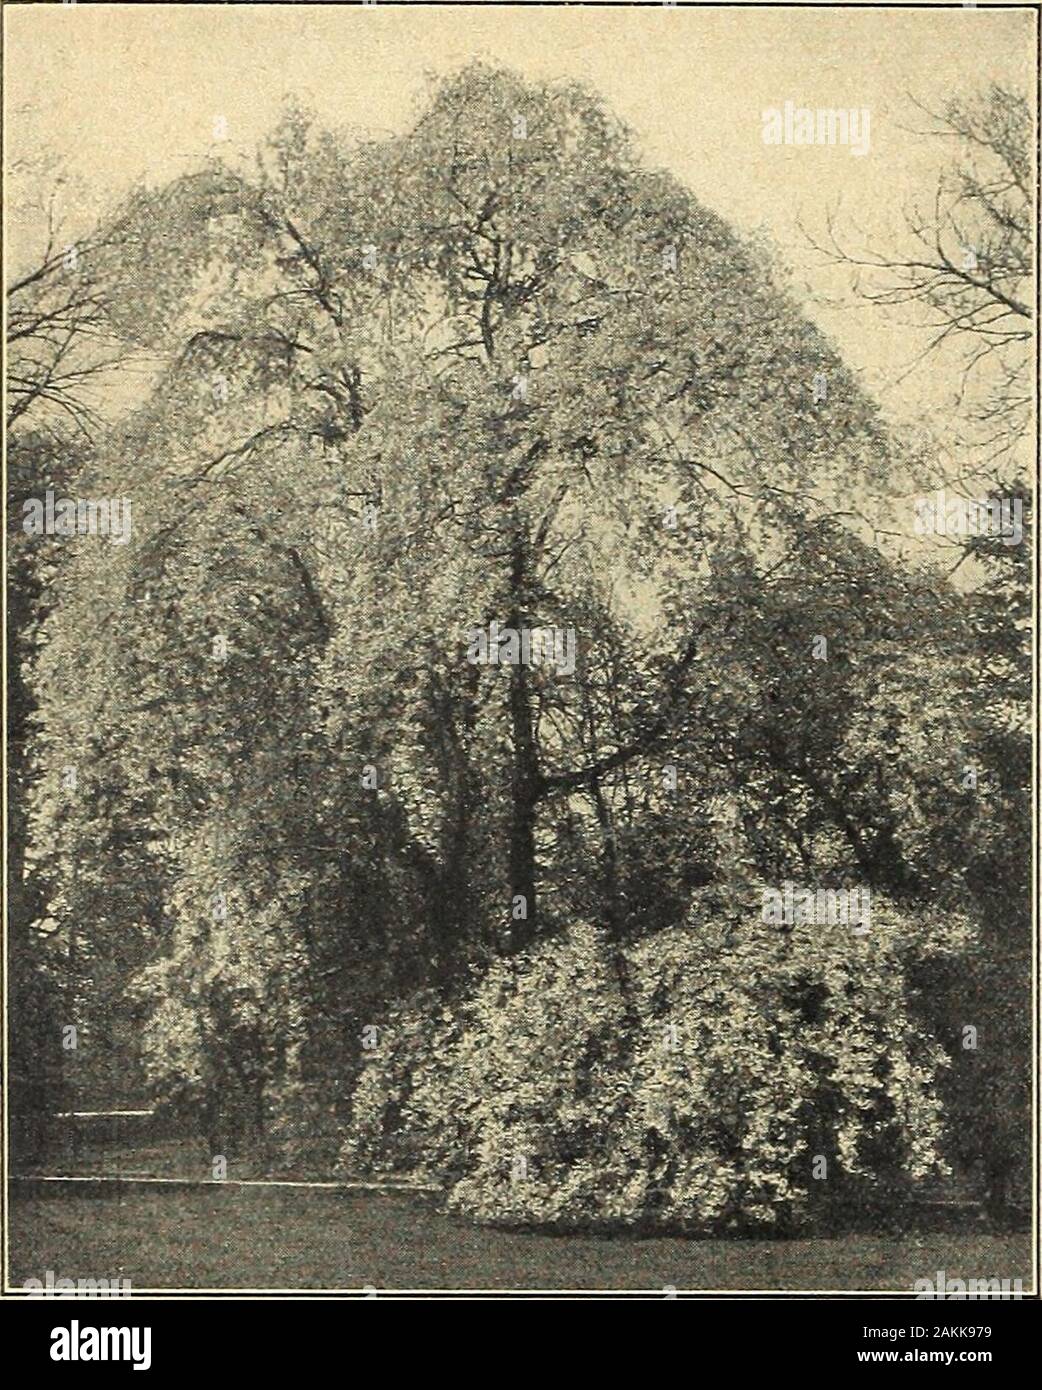 Farquhar's garden annual : 1918 . rose-pink doubleflowers in early Spring; one of f h(^ most beautiful. 2 .50 Pseudo-cerasus, Hizakura. Double deep pink flowers; buds crimson. ... ... ... 2.50 Japoniea rosea pendula. (syn. Prunus suhhirlella var. roseapendula.) (Japanese Weejnng Cherry.) A beautiful tree withgraceful arching branches which droop to the ground. The den-cate pink flowers appear before the foliage. One of the finestweeping trees. $2.50 each. Watereri. Large semi-double flowers of rosy-pink; very orna-mental. $2.50 each.CERCIDIPHYLLUM japonicum. (The Katsura Tree.) A rapid-growing Stock Photo